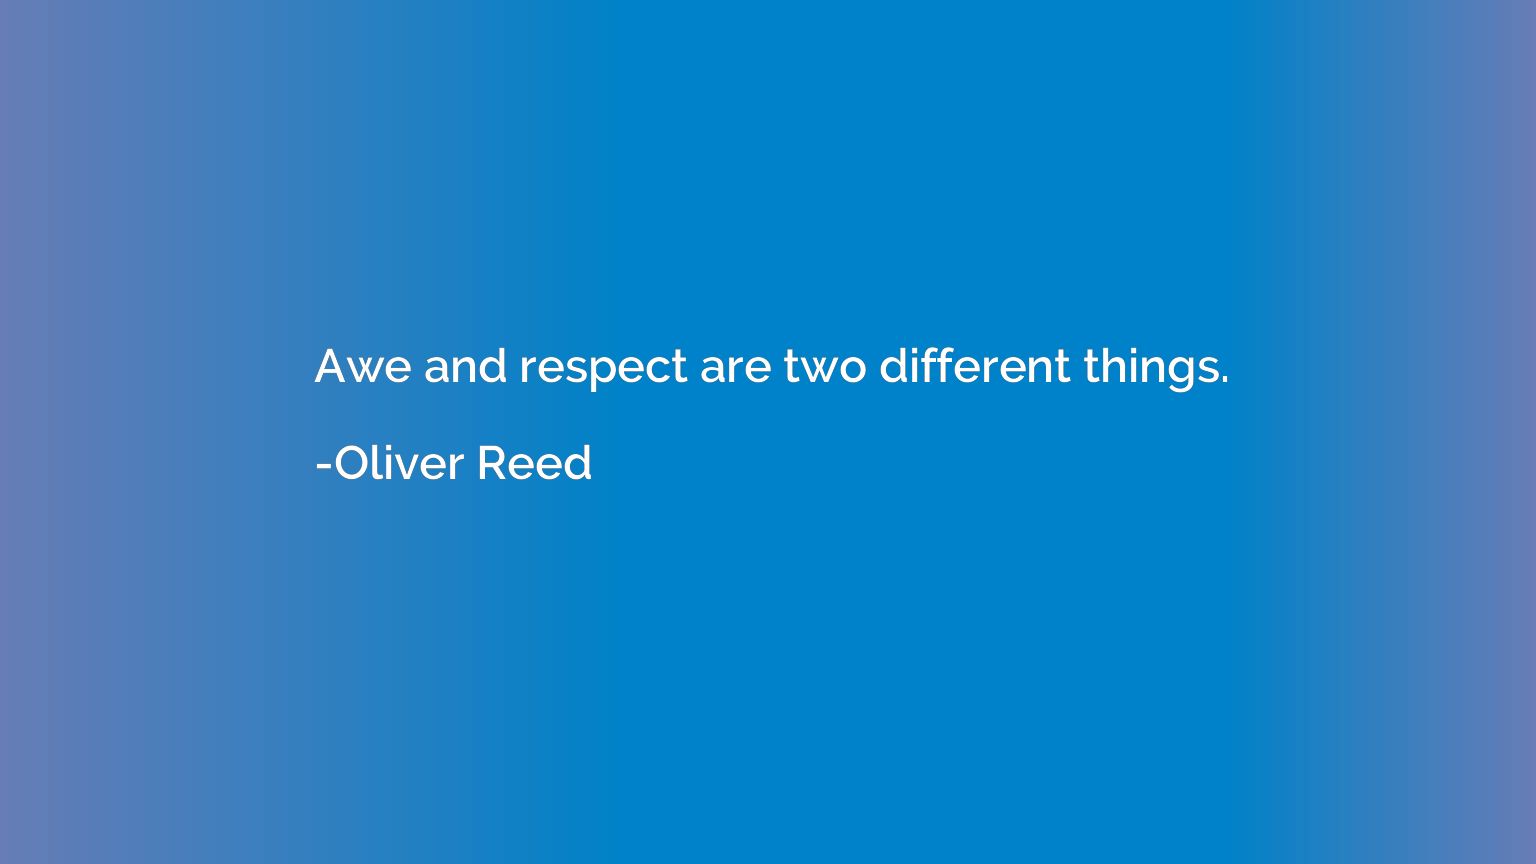 Awe and respect are two different things.